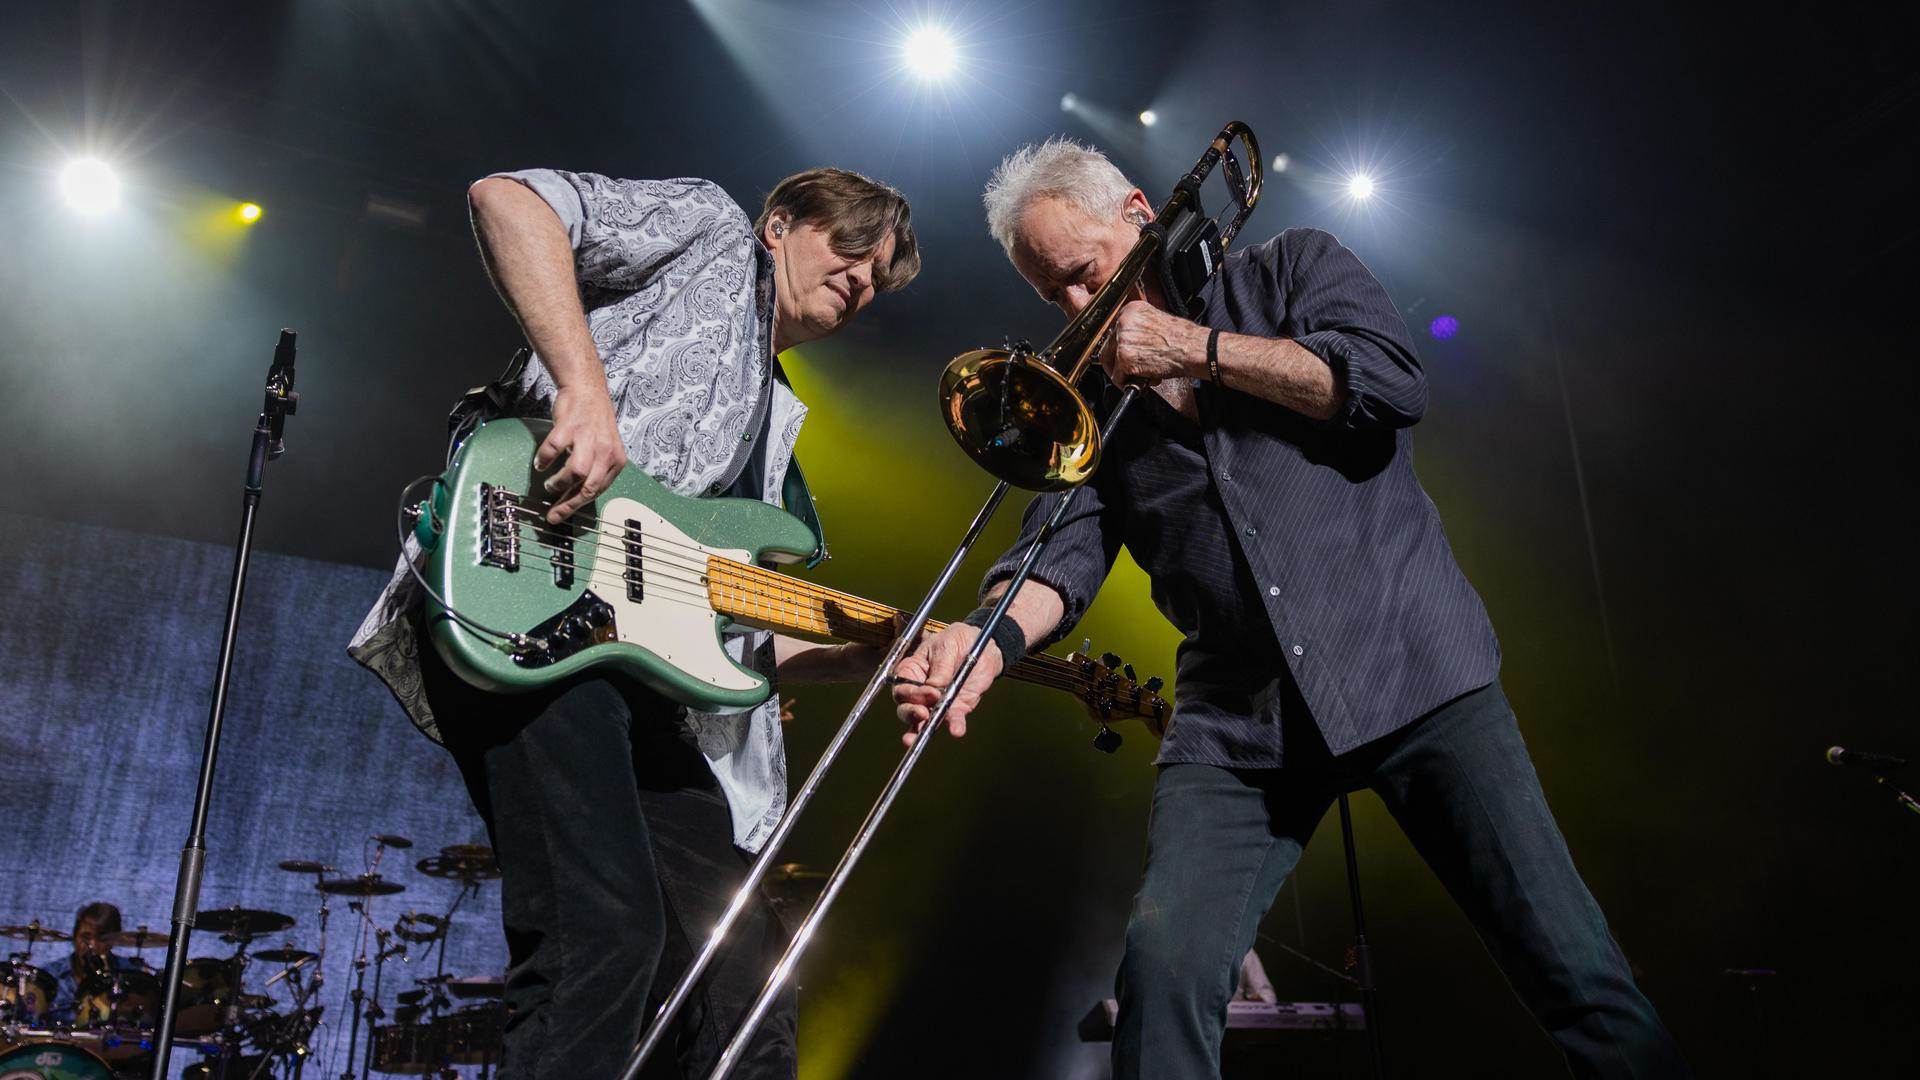 Two older white men on stage. The man on the left is playing a green guitar and the man on the right is playing a trombone.